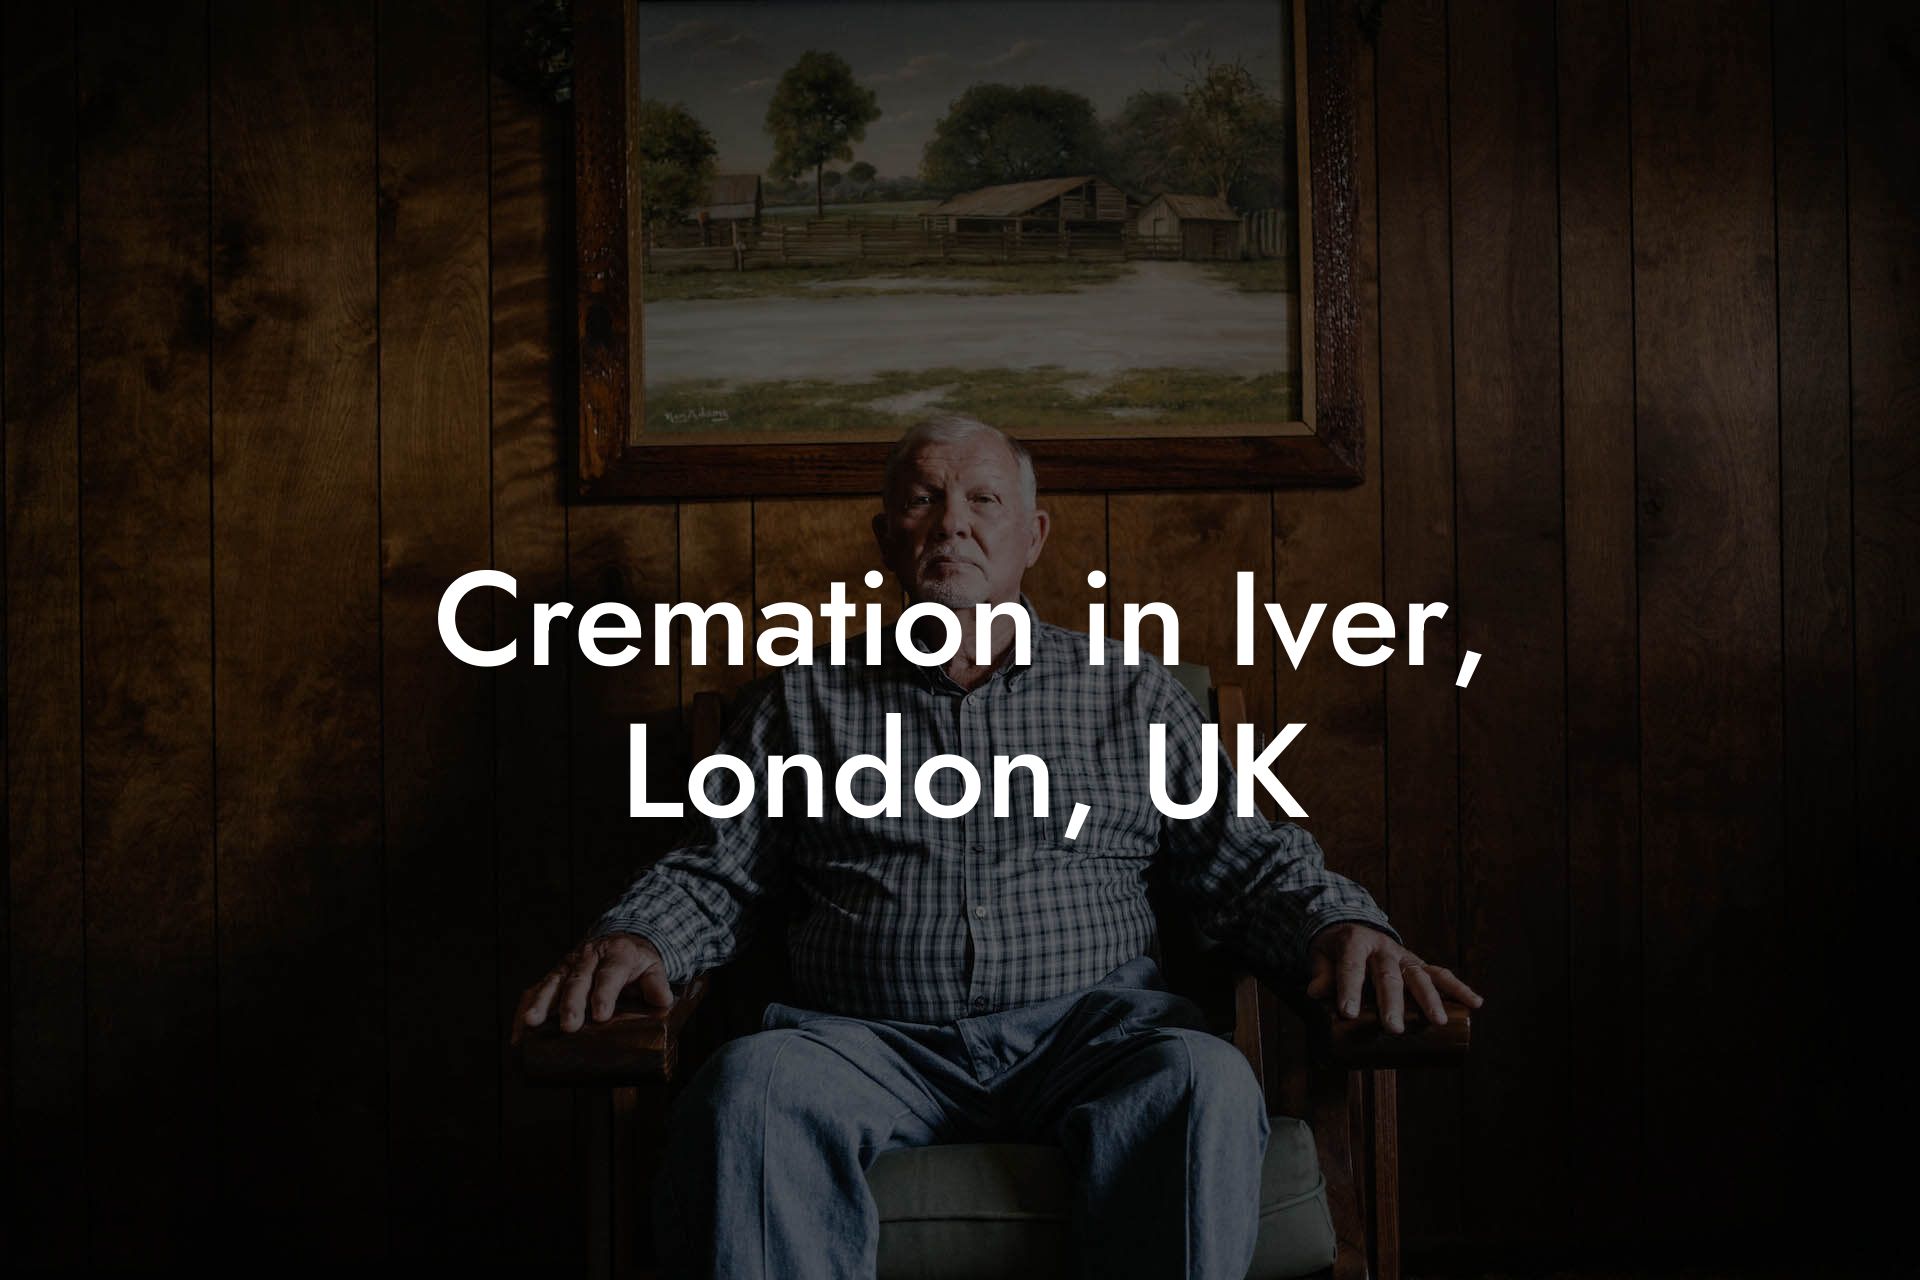 Cremation in Iver, London, UK